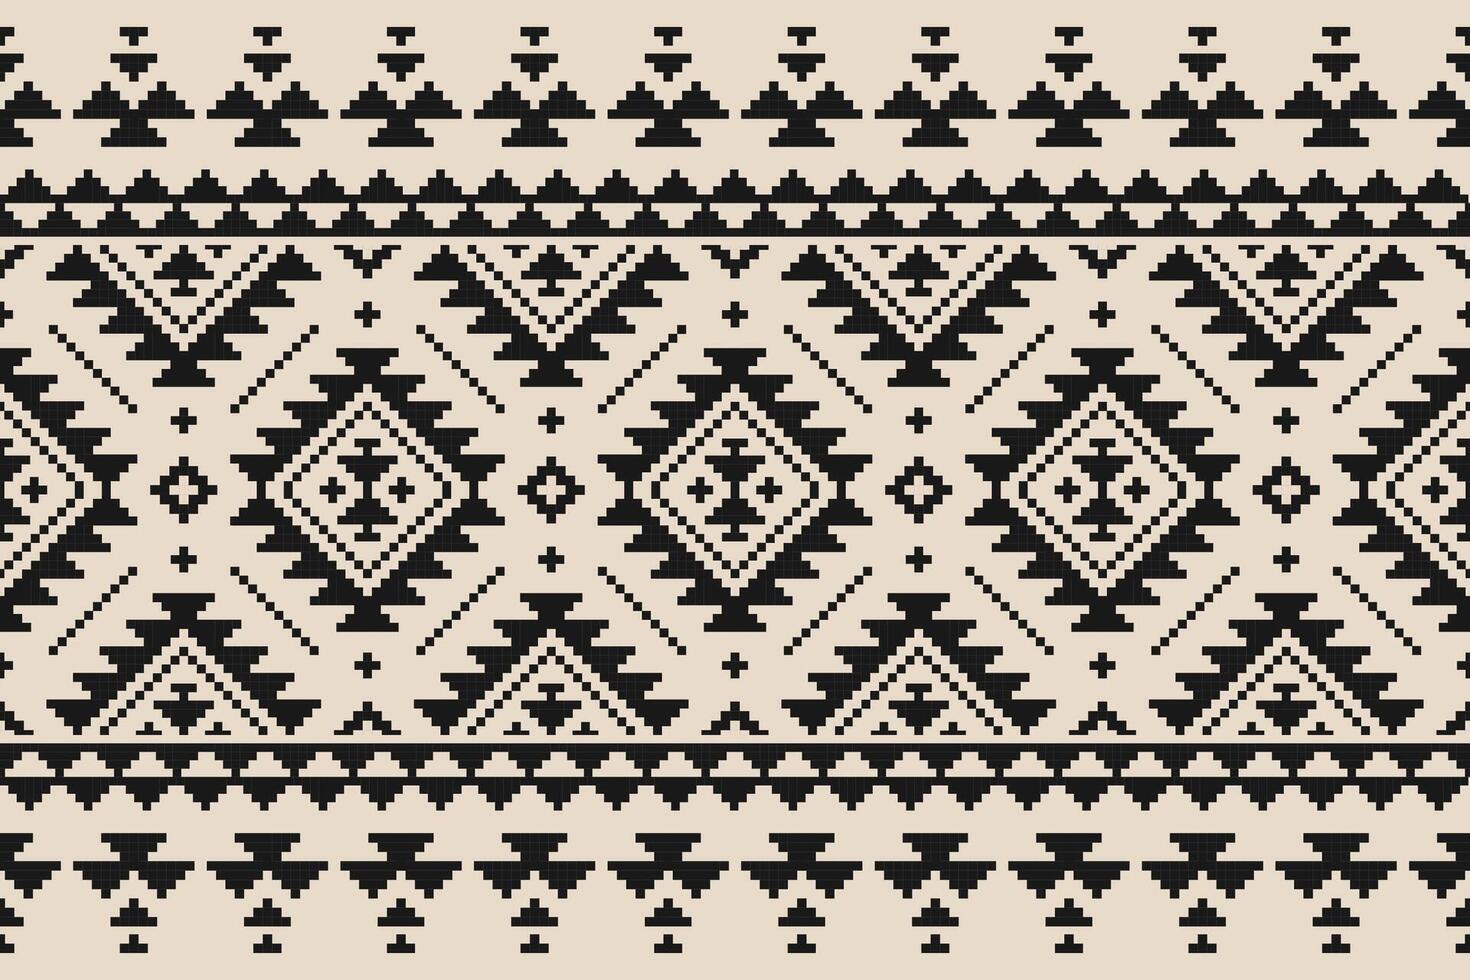 Carpet tribal pattern art. Geometric ethnic seamless pattern traditional. American, Mexican style. Design for background, wallpaper, illustration, fabric, clothing, carpet, textile, batik, embroidery. vector